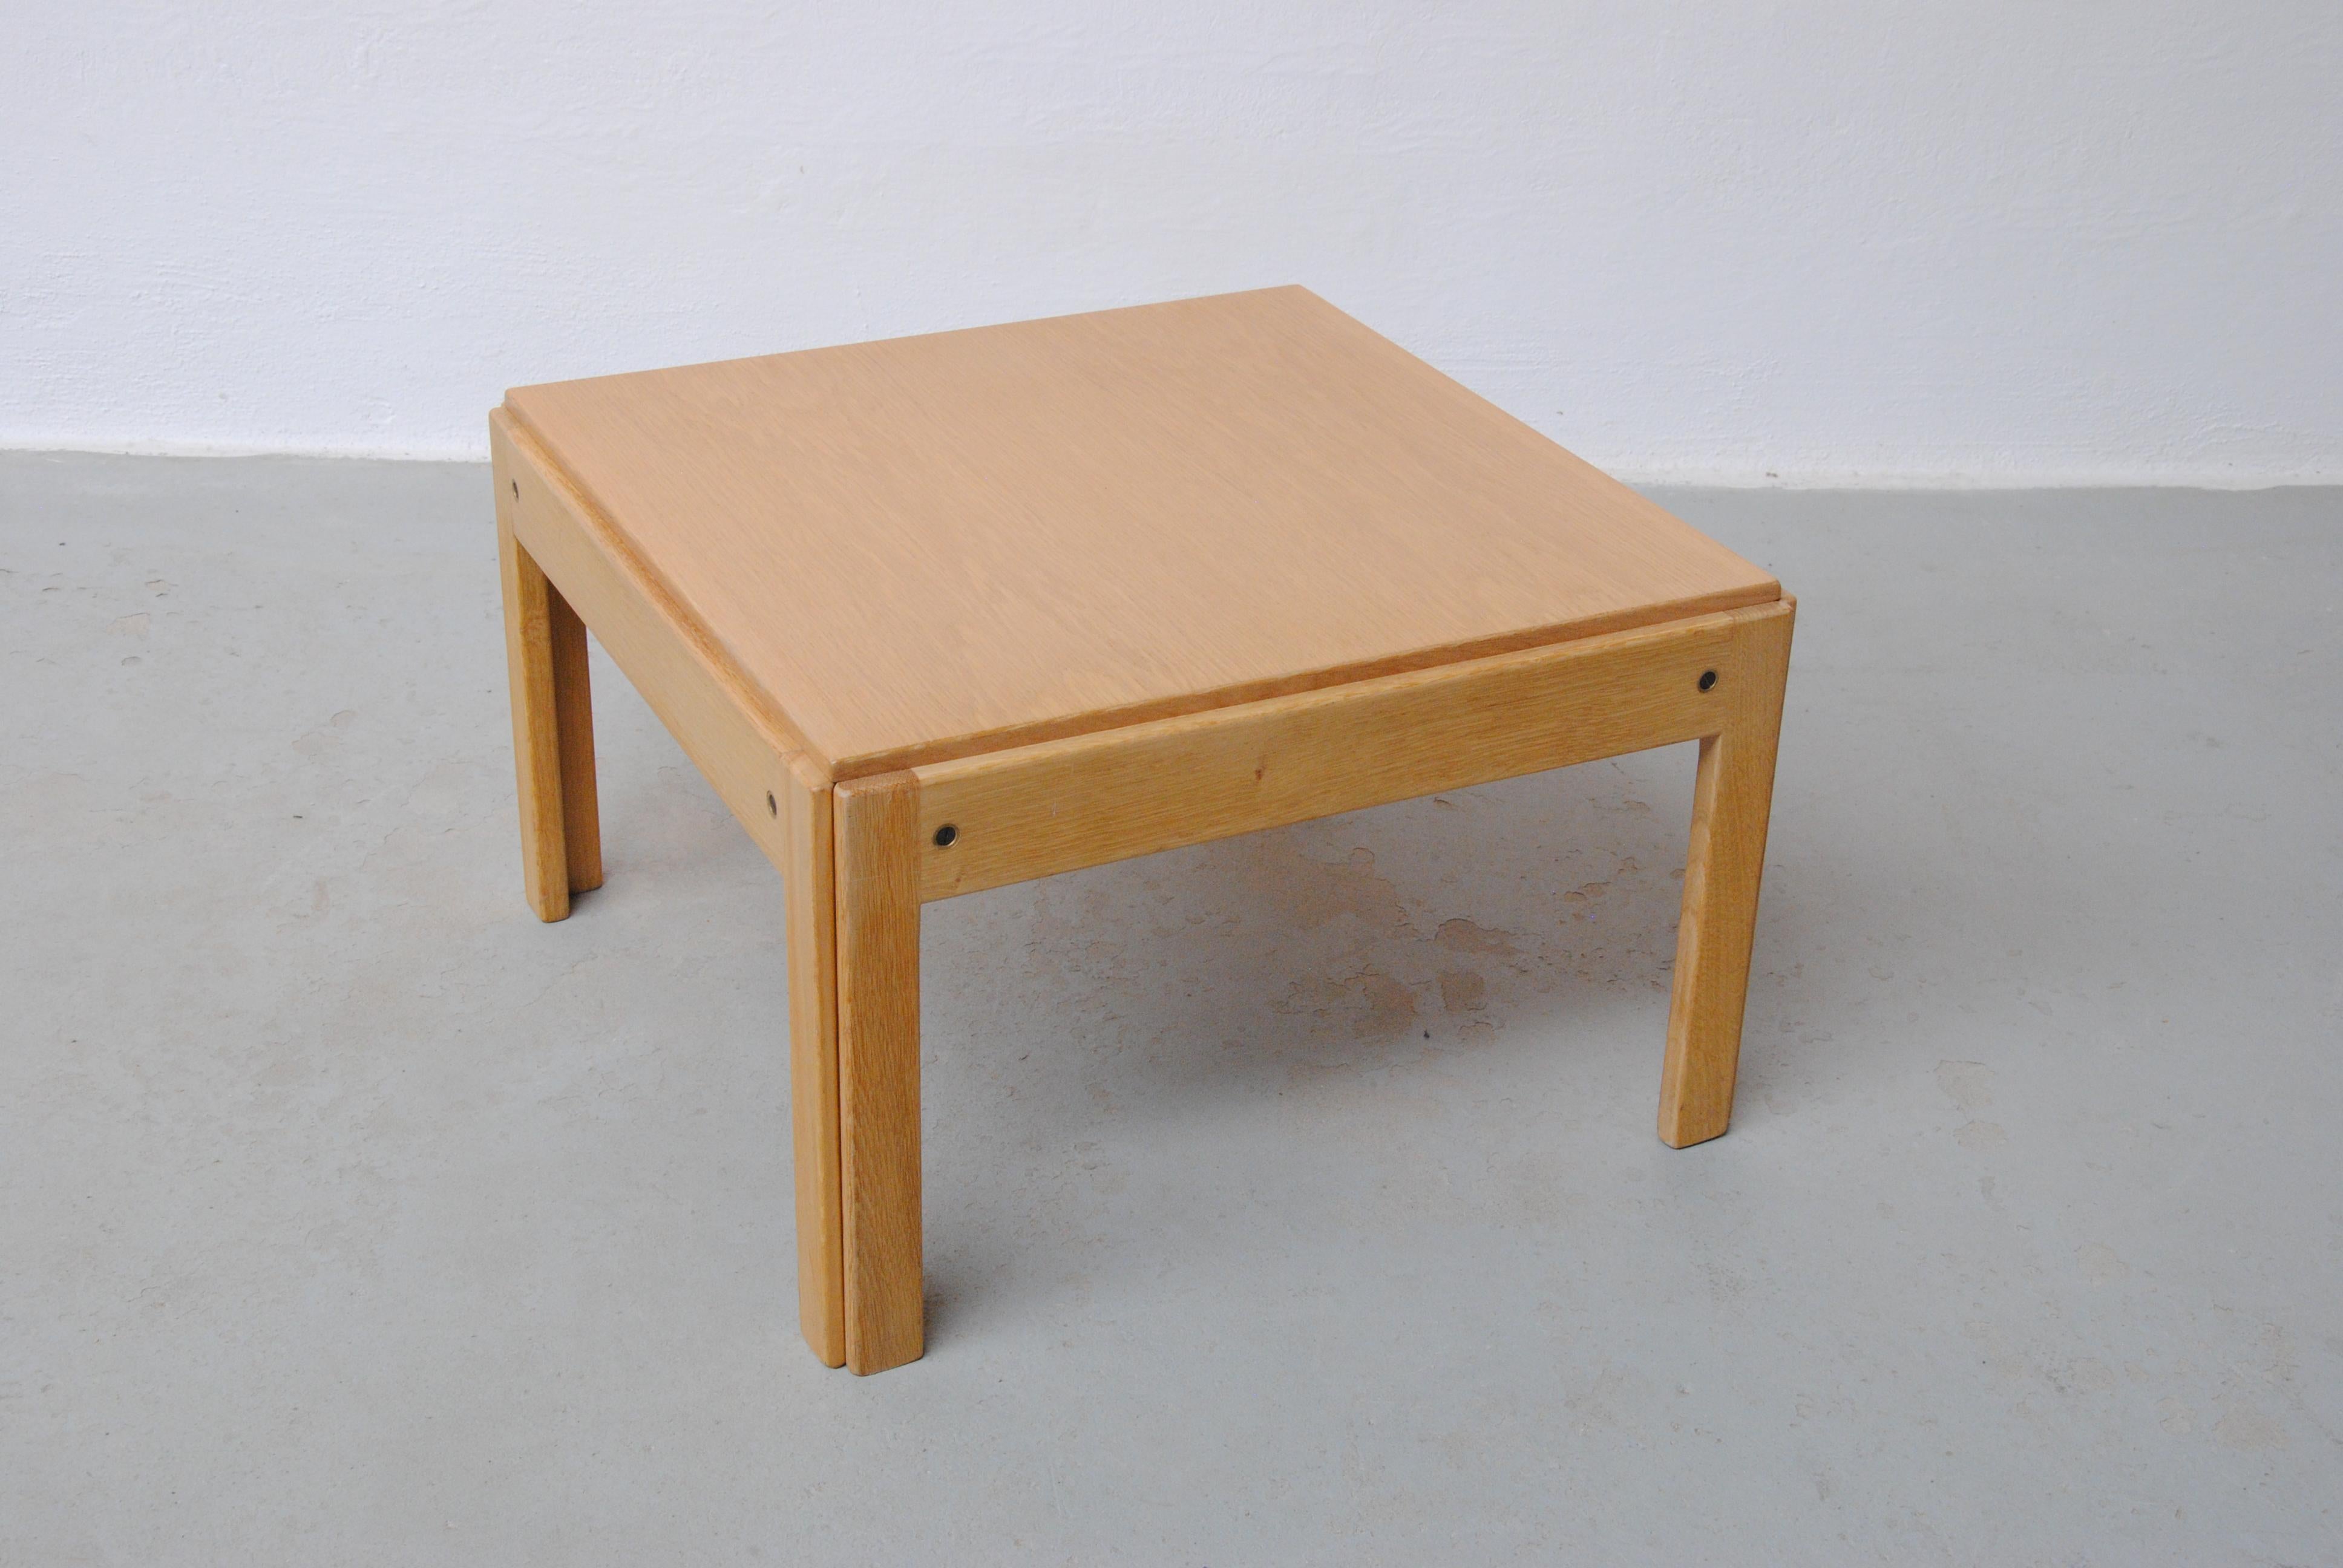 Illum Wikkelsø restored side table in oak from the Plexus series produced by CFC Silkeborg in Denmark.

The well designed side table can be osed as both sidetable and with a pillow on top of it also as a foot stool. The side table has been fully